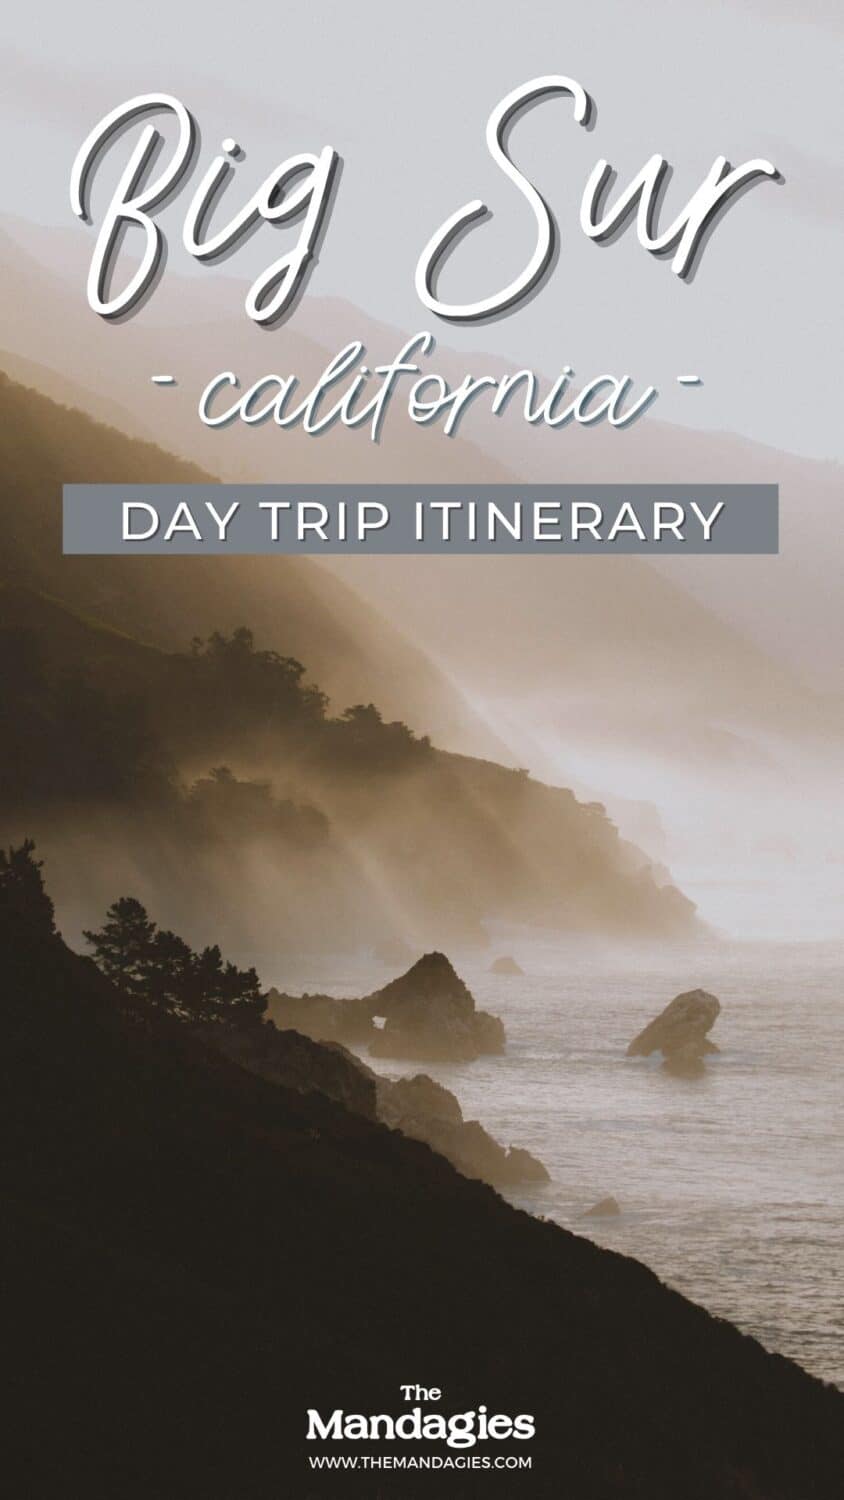 Ready to plan the best day trip to Big Sur State Park? This stunning park on the California Coast is an easy day trip from San Francisco - perfect for adventure lovers! Save this post for inspiraiton to McWay Falls | Pfeiffer Beach | Carmel By The Sea |Bixby Creek Bridge #california #pacificcoasthighway #Bigsur #Roadtrip #pacificocean #hiking #camping #sunrise #travelcalifornia #travel #USAtravel #usa #photography #sunset #PNW #pacificnorthwest